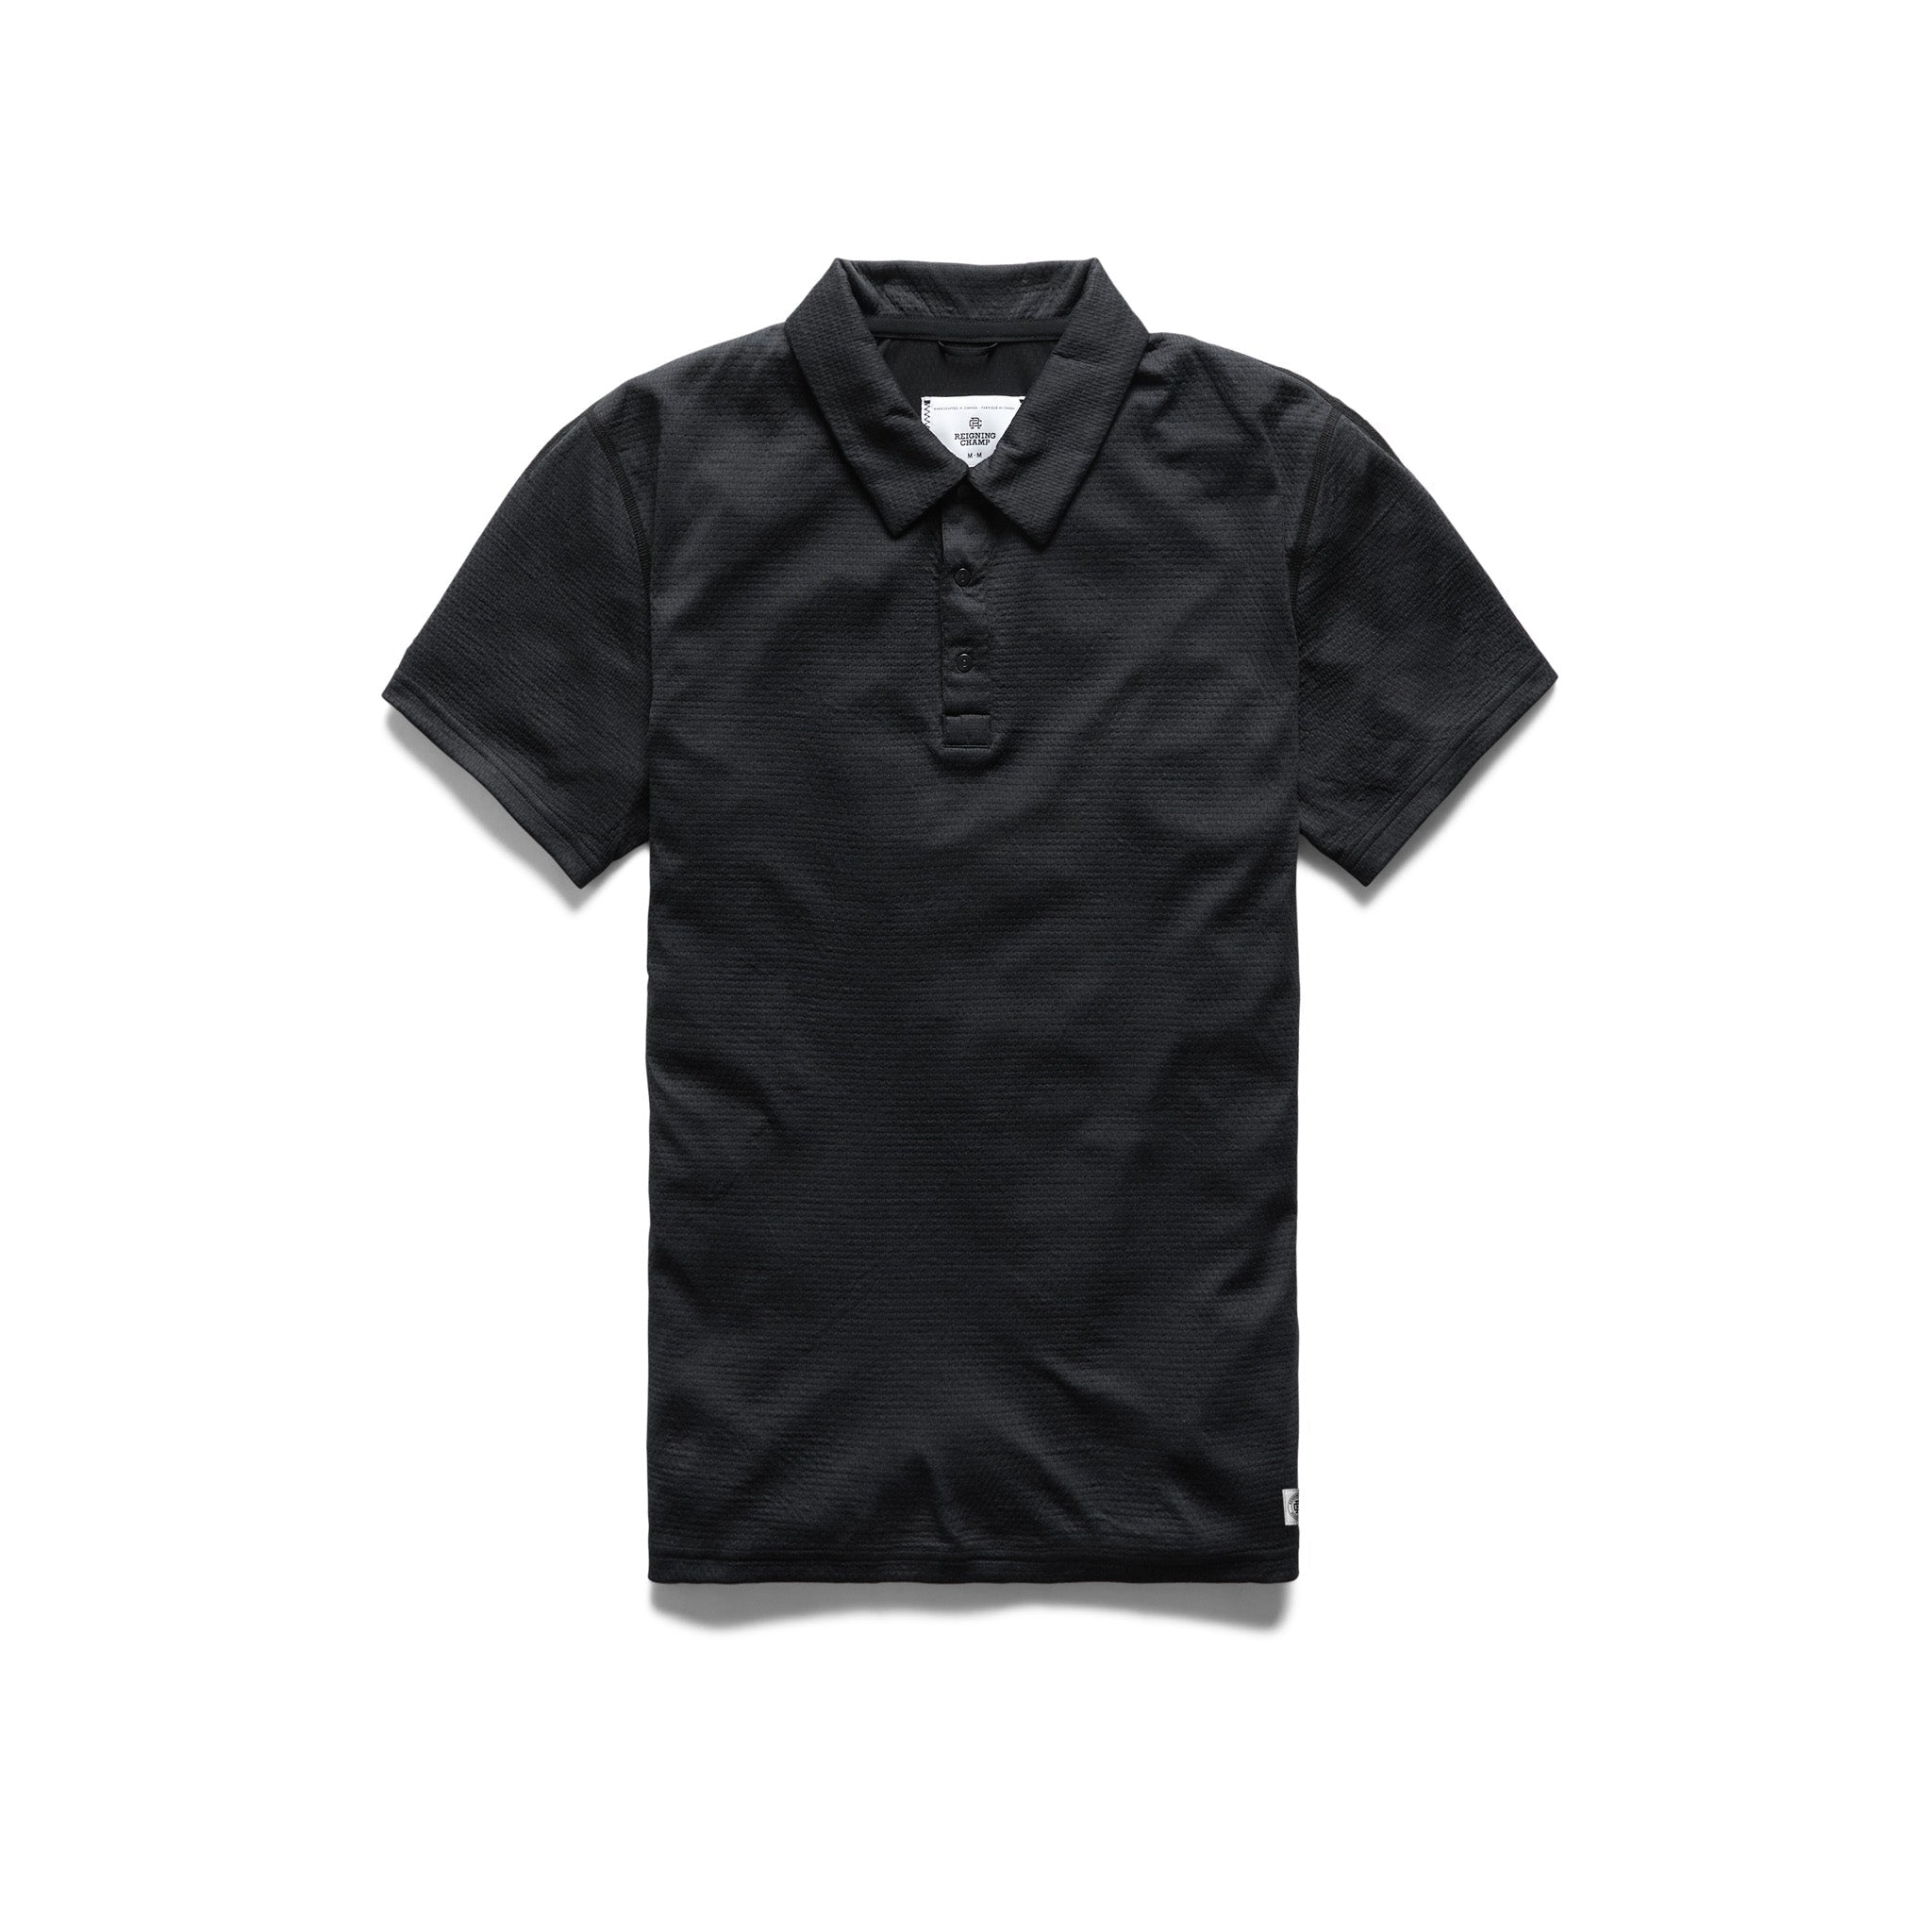 Reigning Champ | レイニングチャンプ】Solotex Mesh Polo | Reigning Champ JP